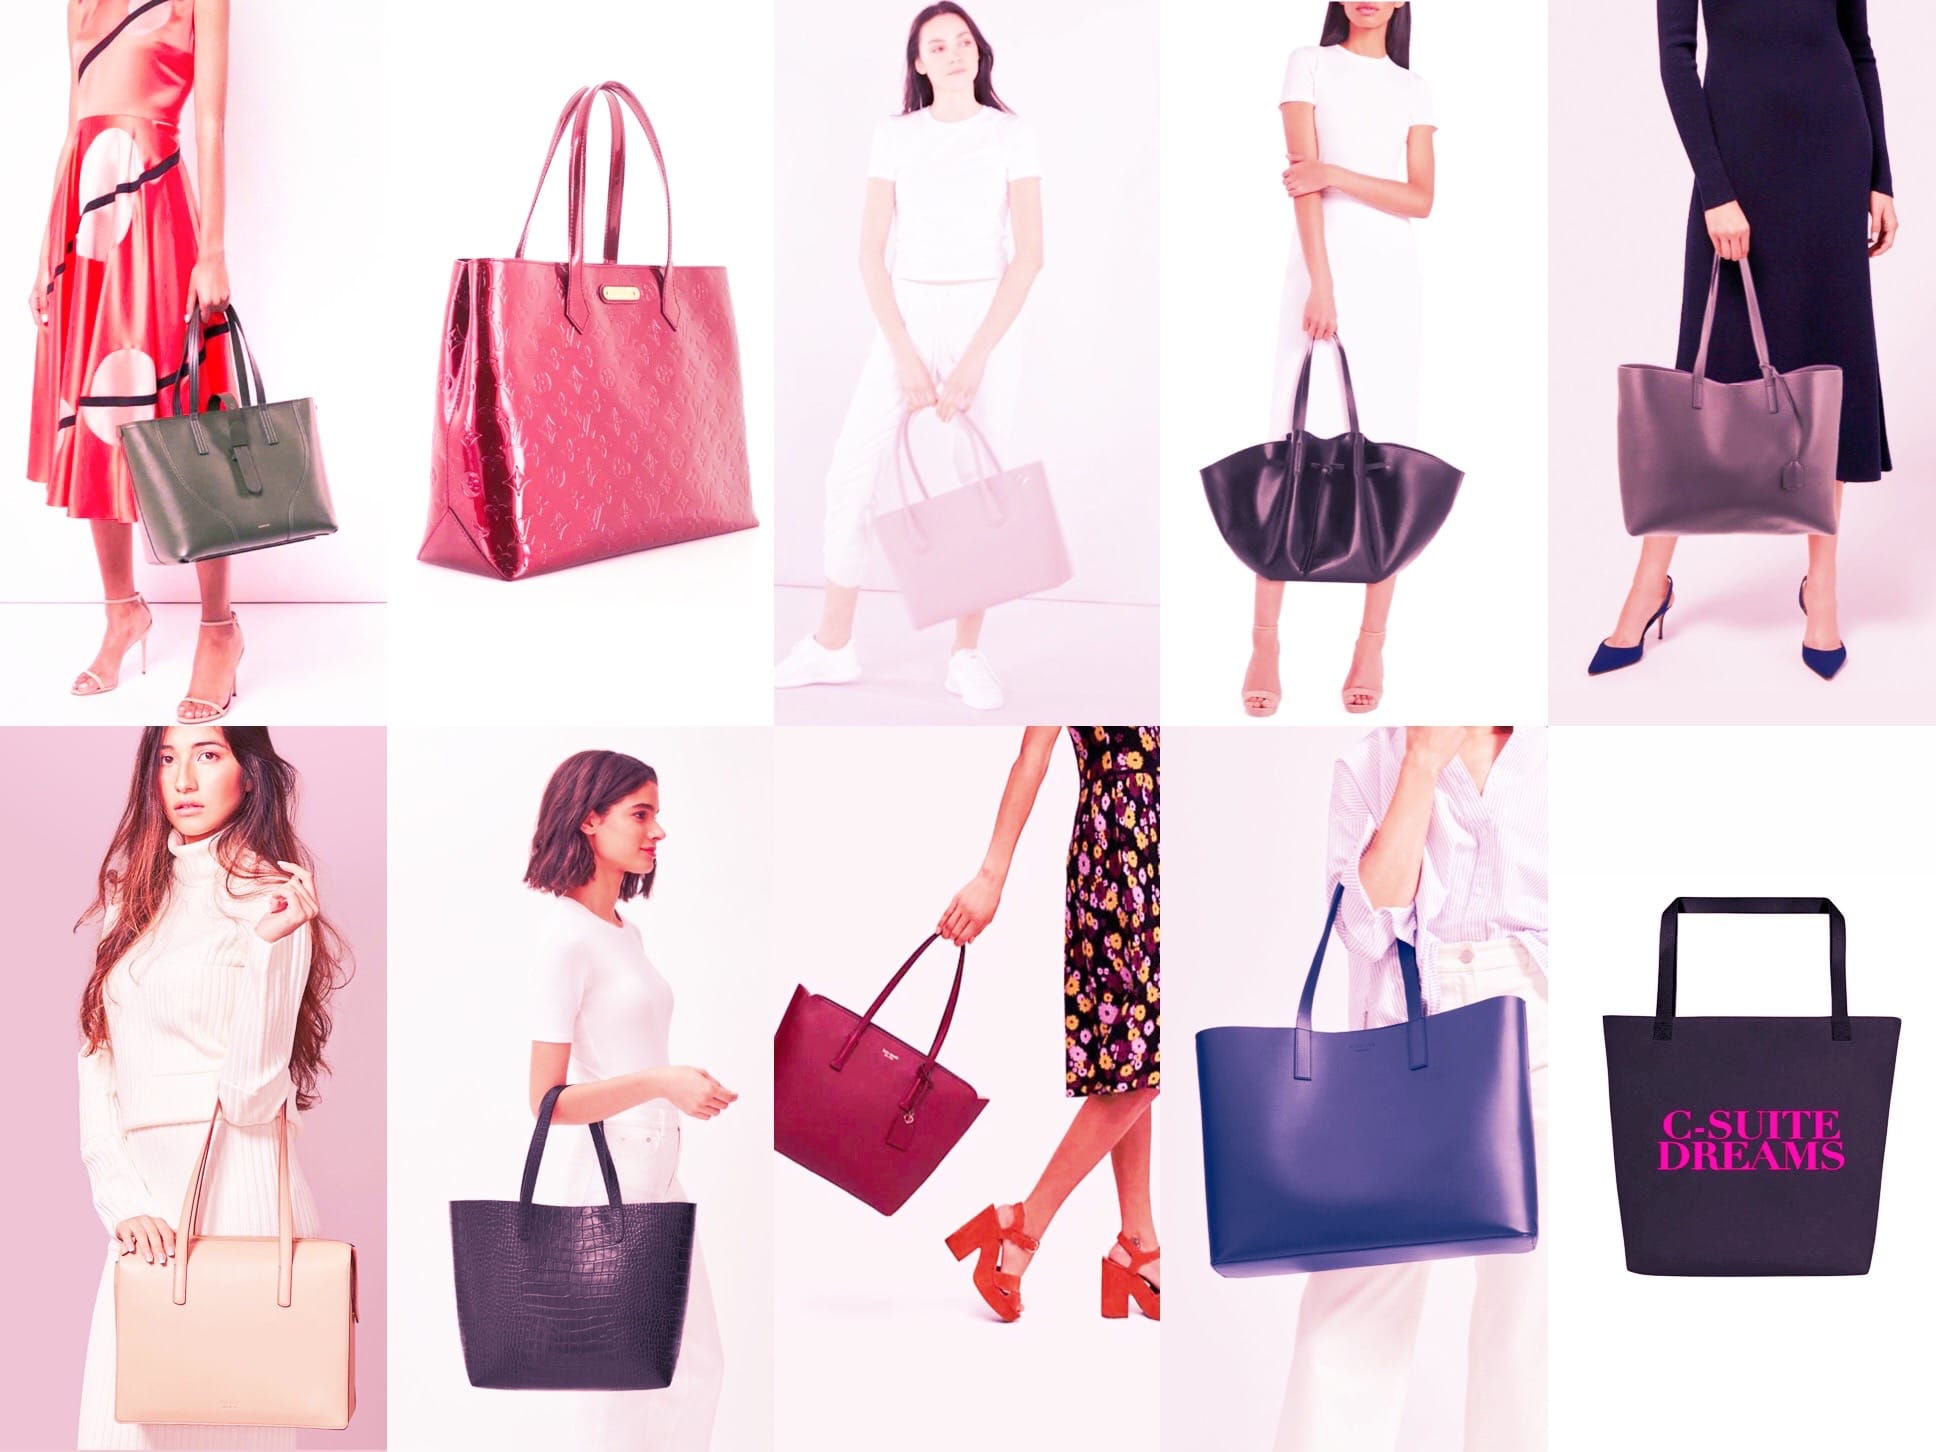 tote style bags